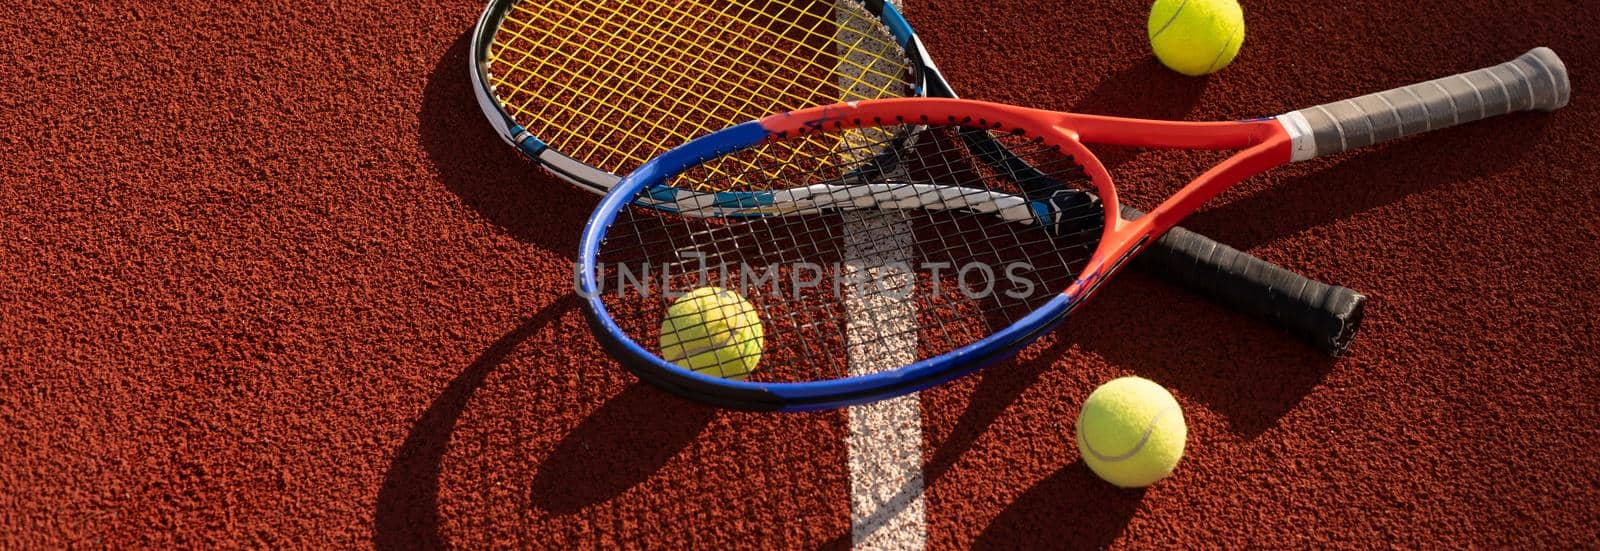 Close up view of two tennis rackets and balls on the tennis court. by Andelov13